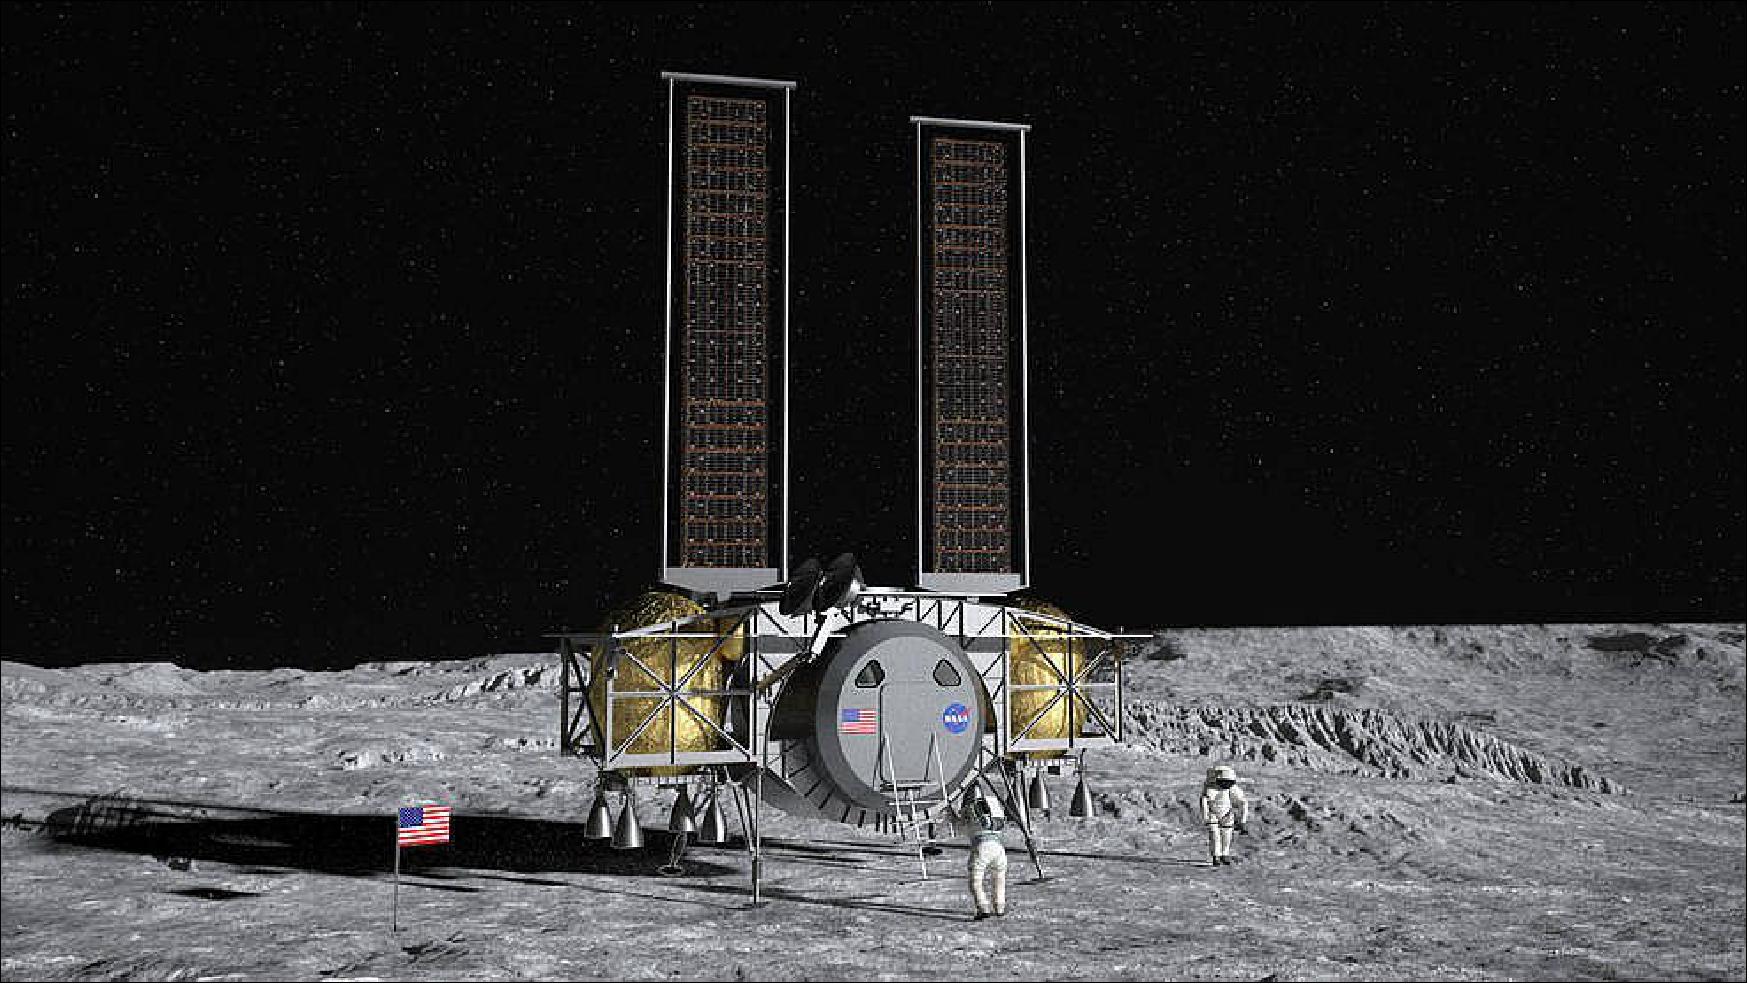 Figure 41: Artist concept of the Dynetics Human Landing System on the surface of the Moon (image credit: Dynetics)